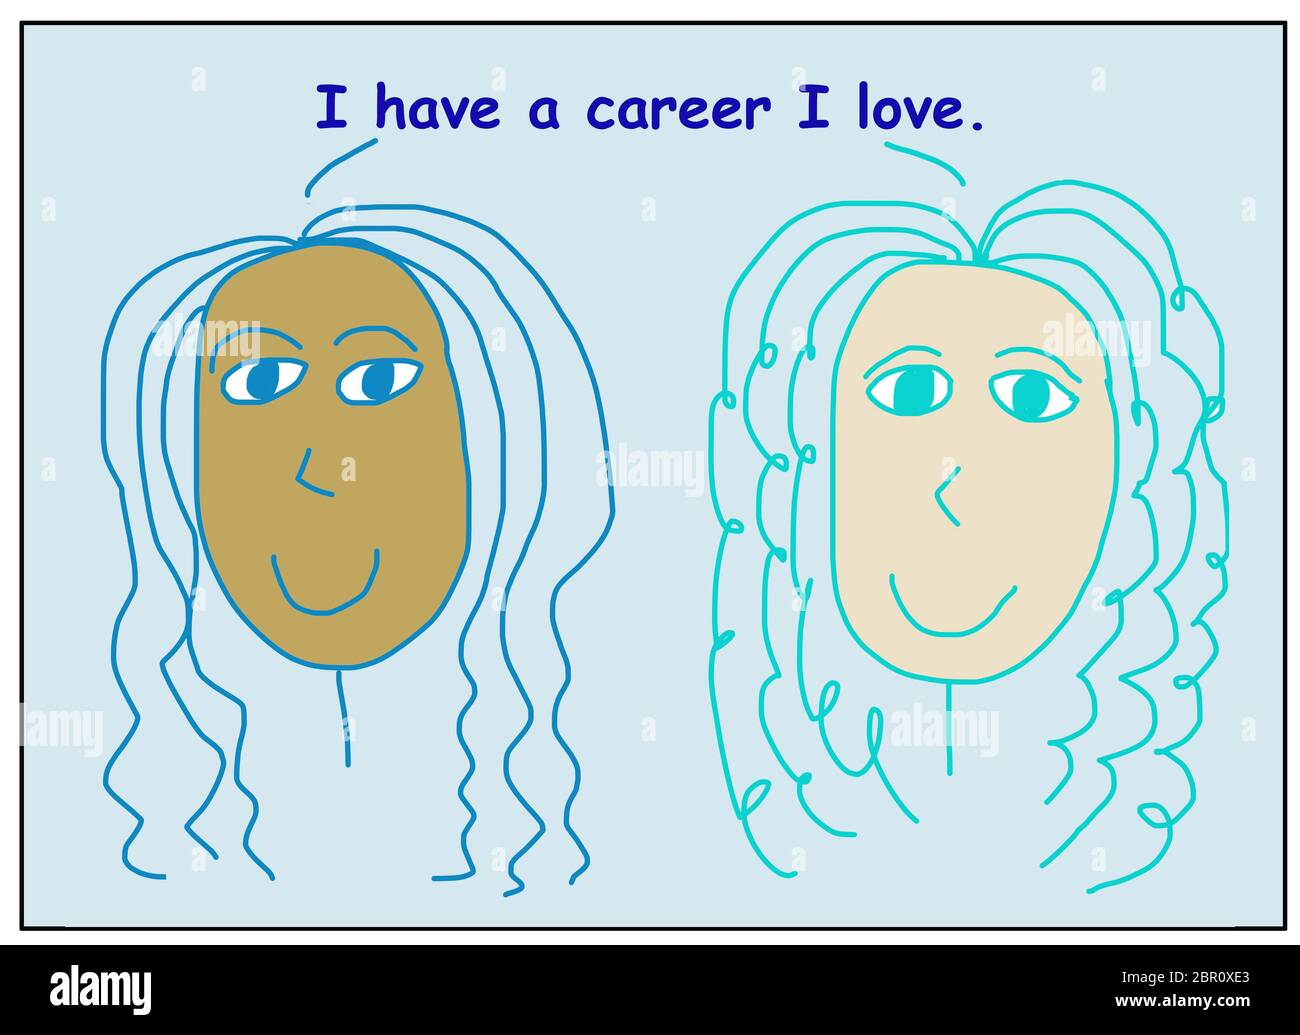 Color cartoon of two smiling, beautiful and ethnically diverse women stating I have a career I love. Stock Photo